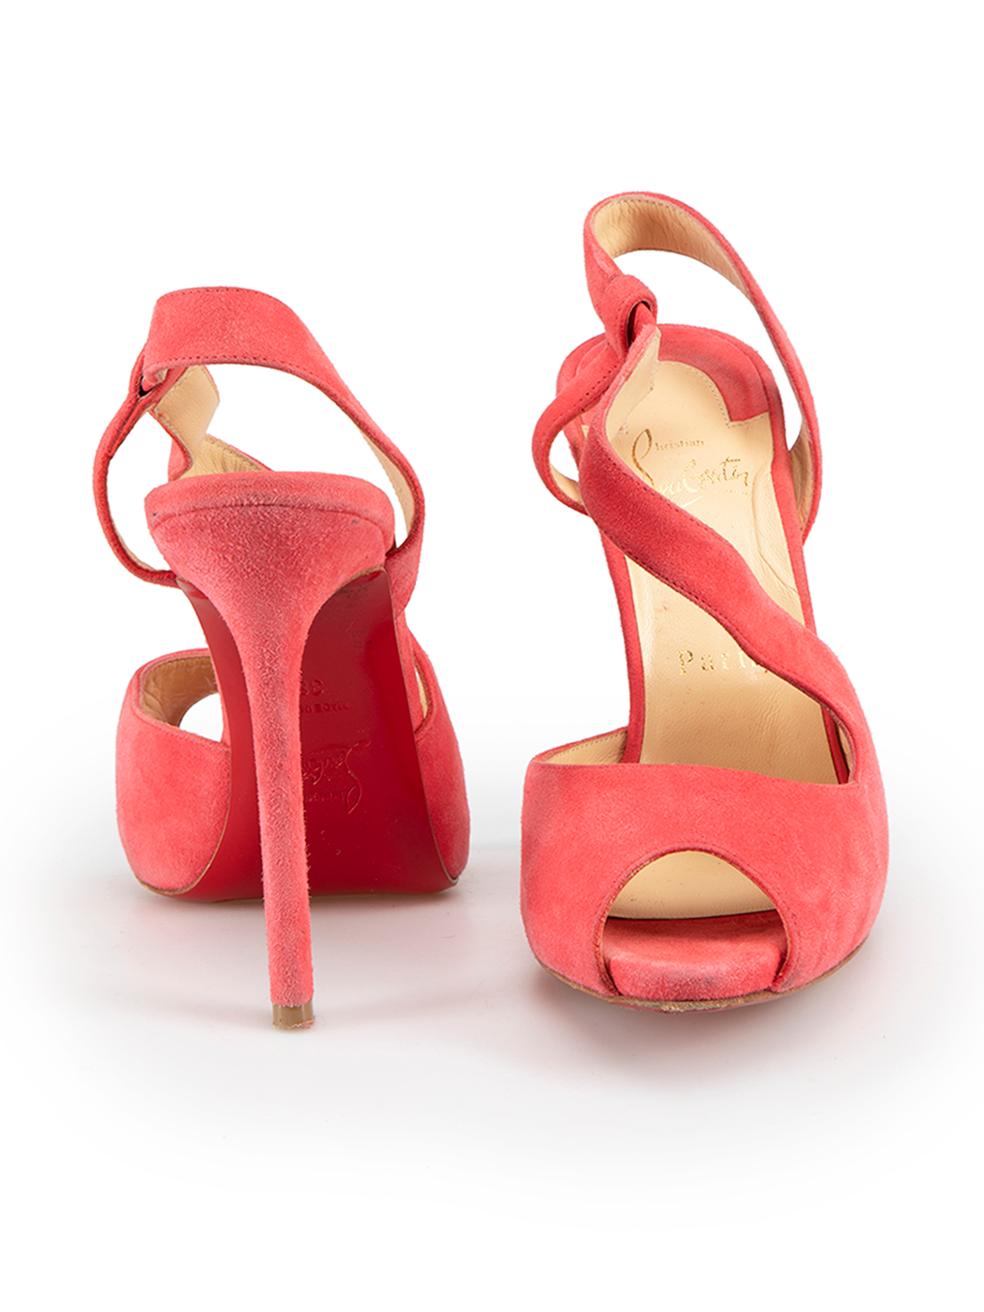 Christian Louboutin Pink Suede Peep Toe Heels Size IT 38 In Excellent Condition For Sale In London, GB